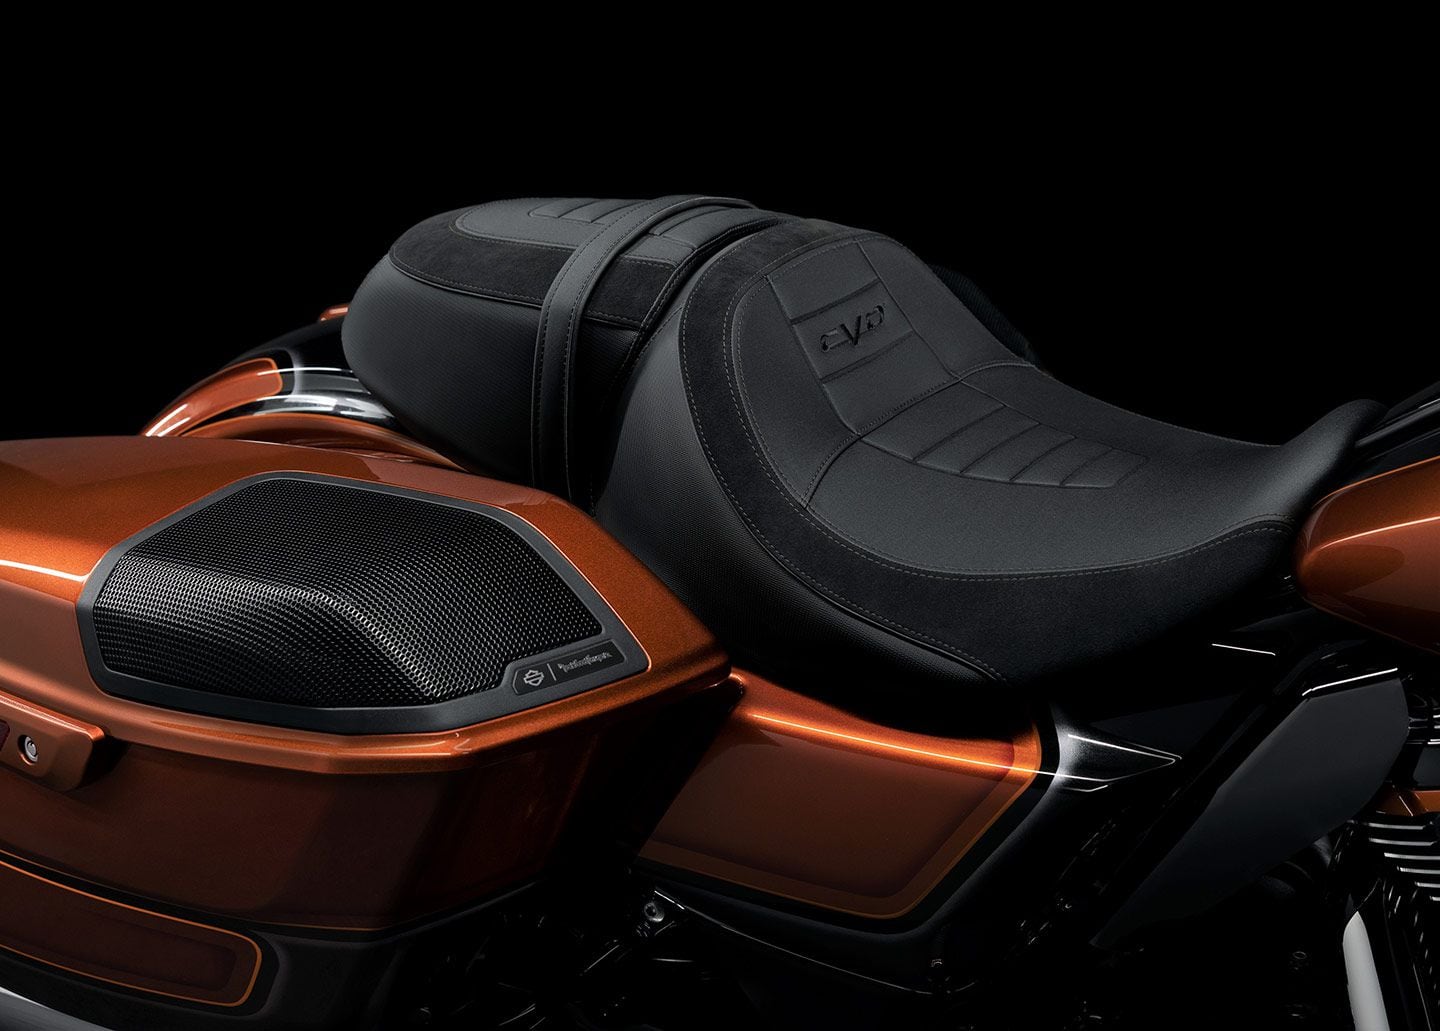 Improved ergonomics include a redesigned seat for both models, set at 28 inches off the ground. The new saddlebags appear more compact, but actually have slightly more volume for speakers and cargo.